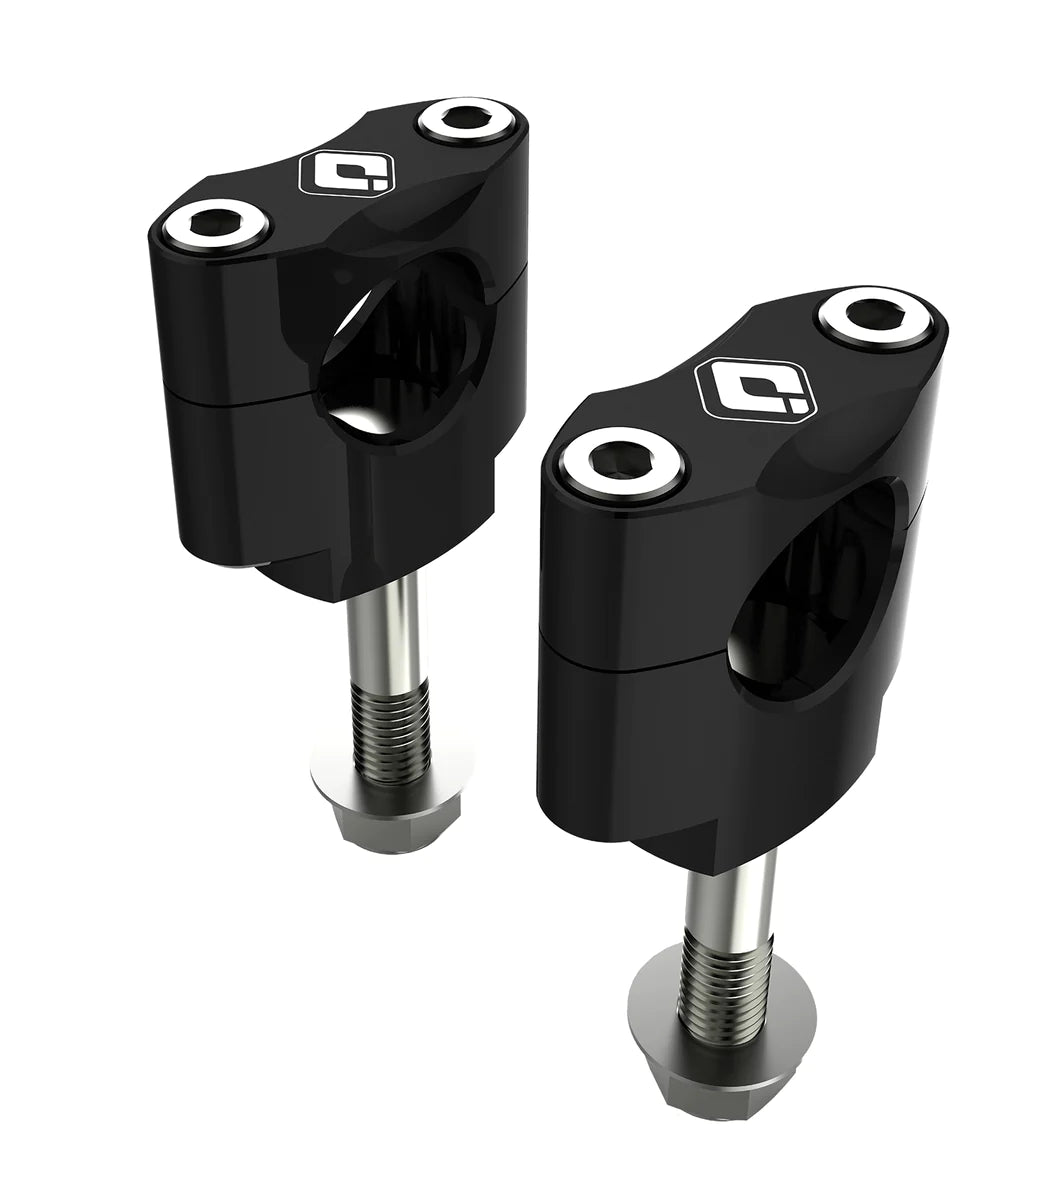 Oversize bar clamps 1-1/8 for upgrading handlebars, product view